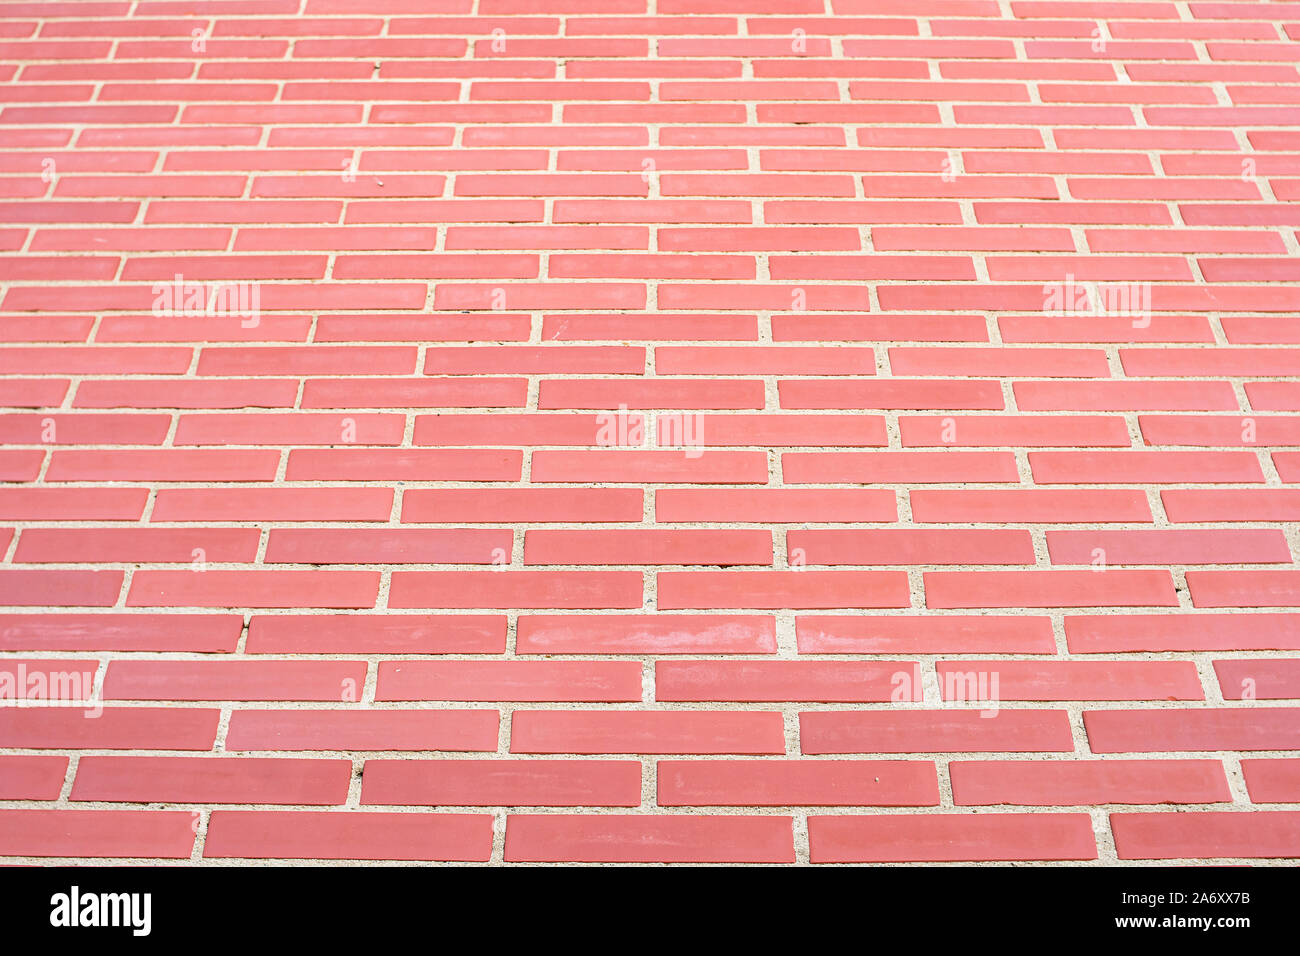 Wall of bricks and cement, reddish in color, forming a high and uniform wall Stock Photo